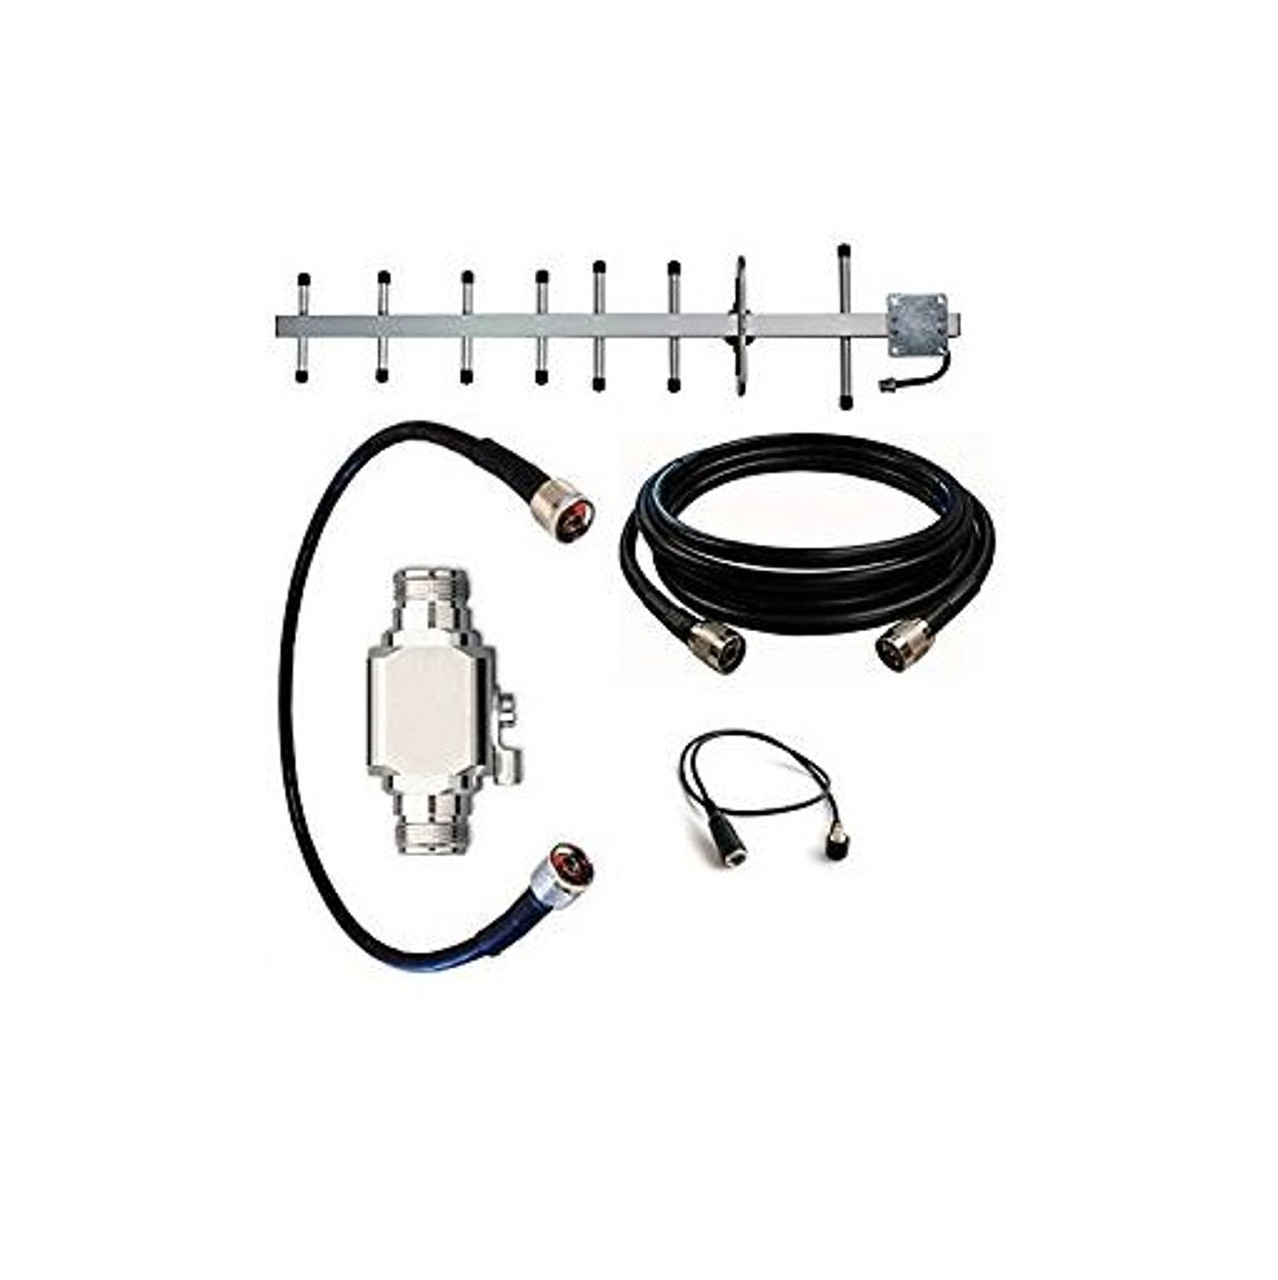 100 ft Directional Antenna Kit for Huawei E8372 USB Dongle - Engr E-Store